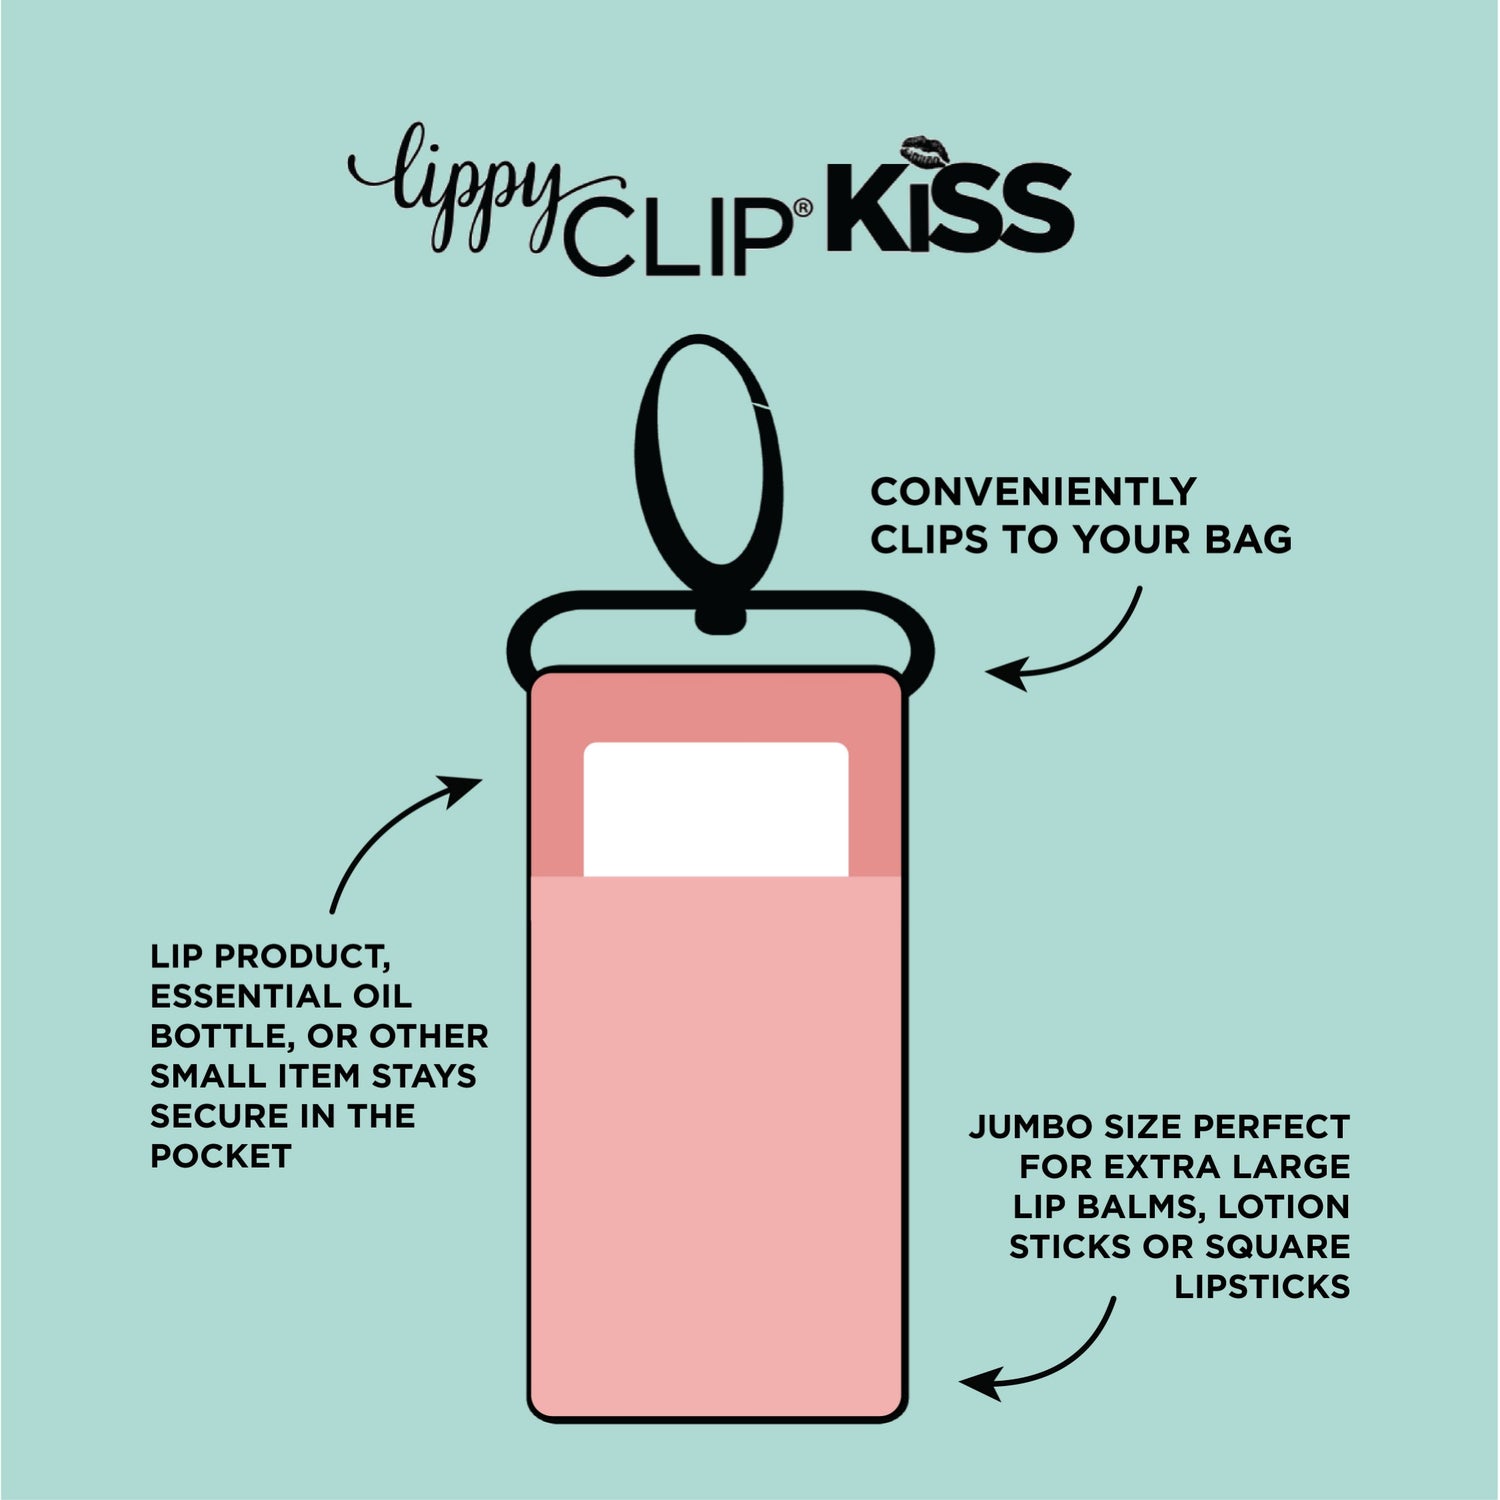 Tie Dye LippyClipKISS for larger lip balms, essential oil rollers, and more